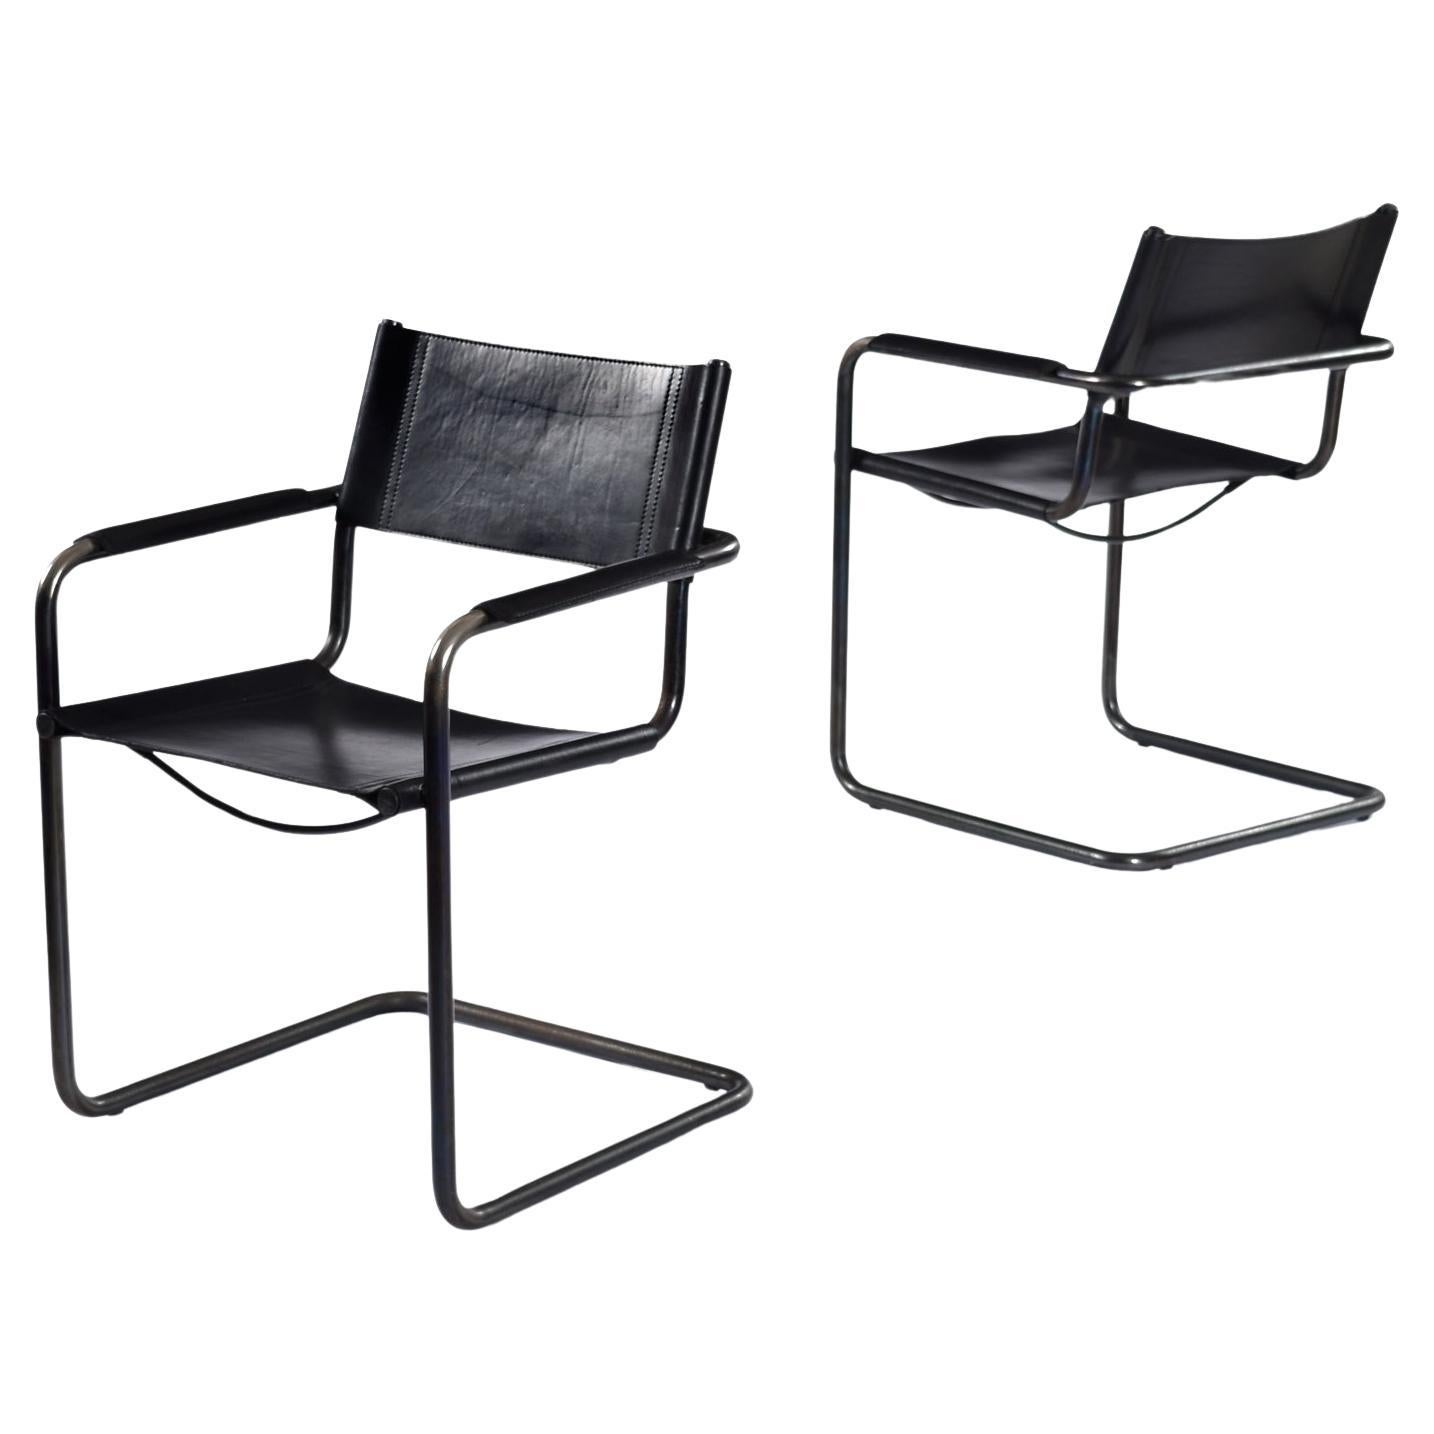 Matteo Grassi Cantilever MG5 Black Leather Chairs by Centro Studi For Sale